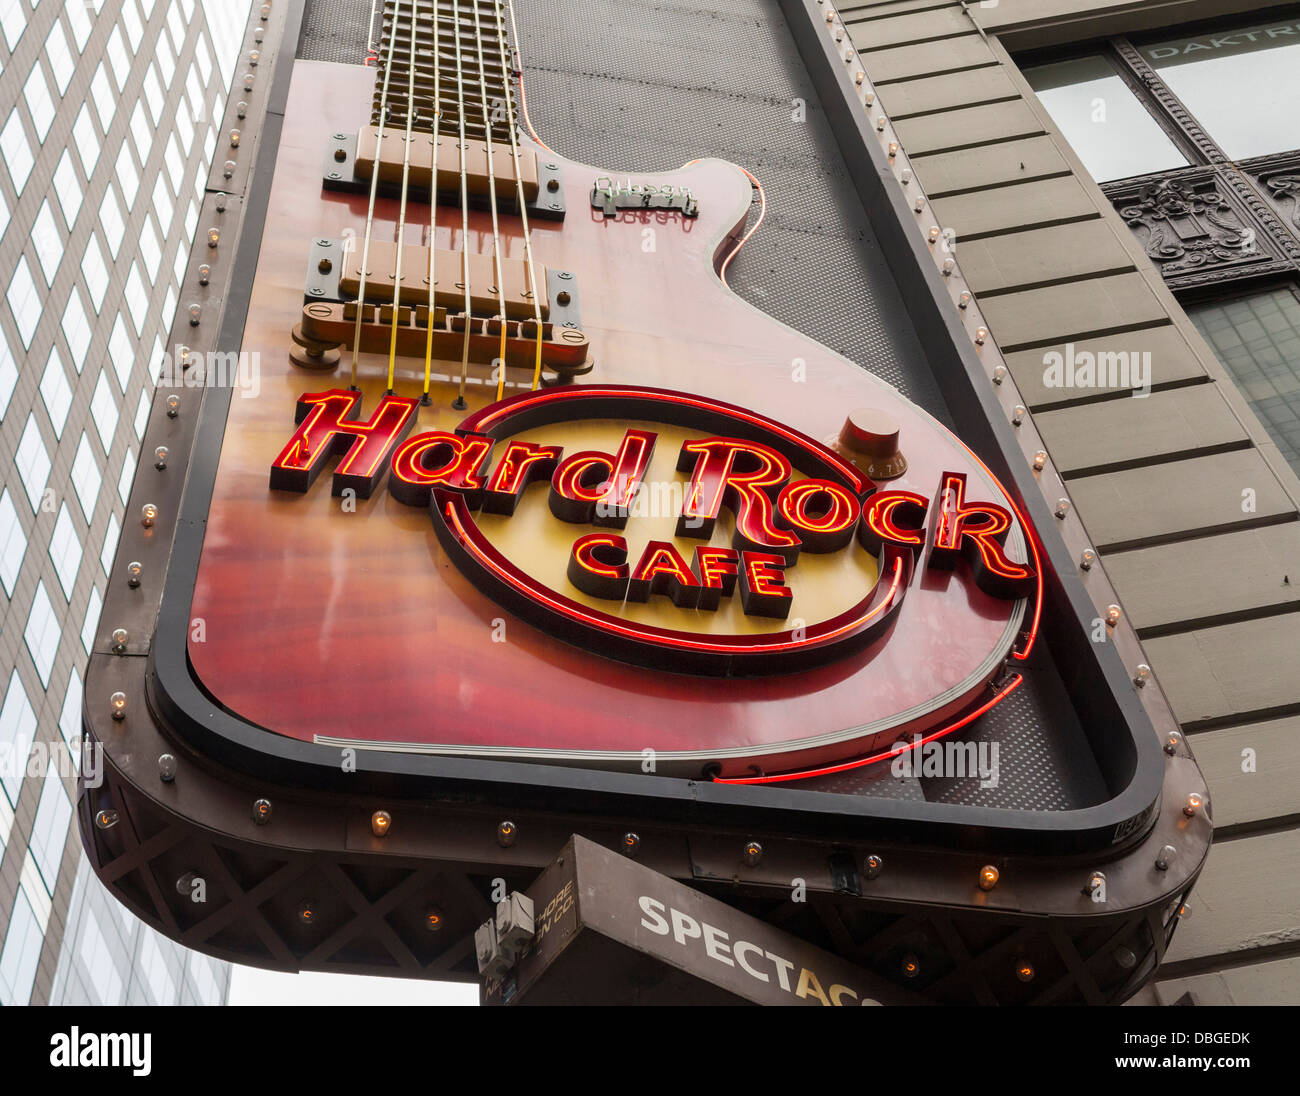 L'Hard Rock Cafe, Times Square NYC Foto Stock